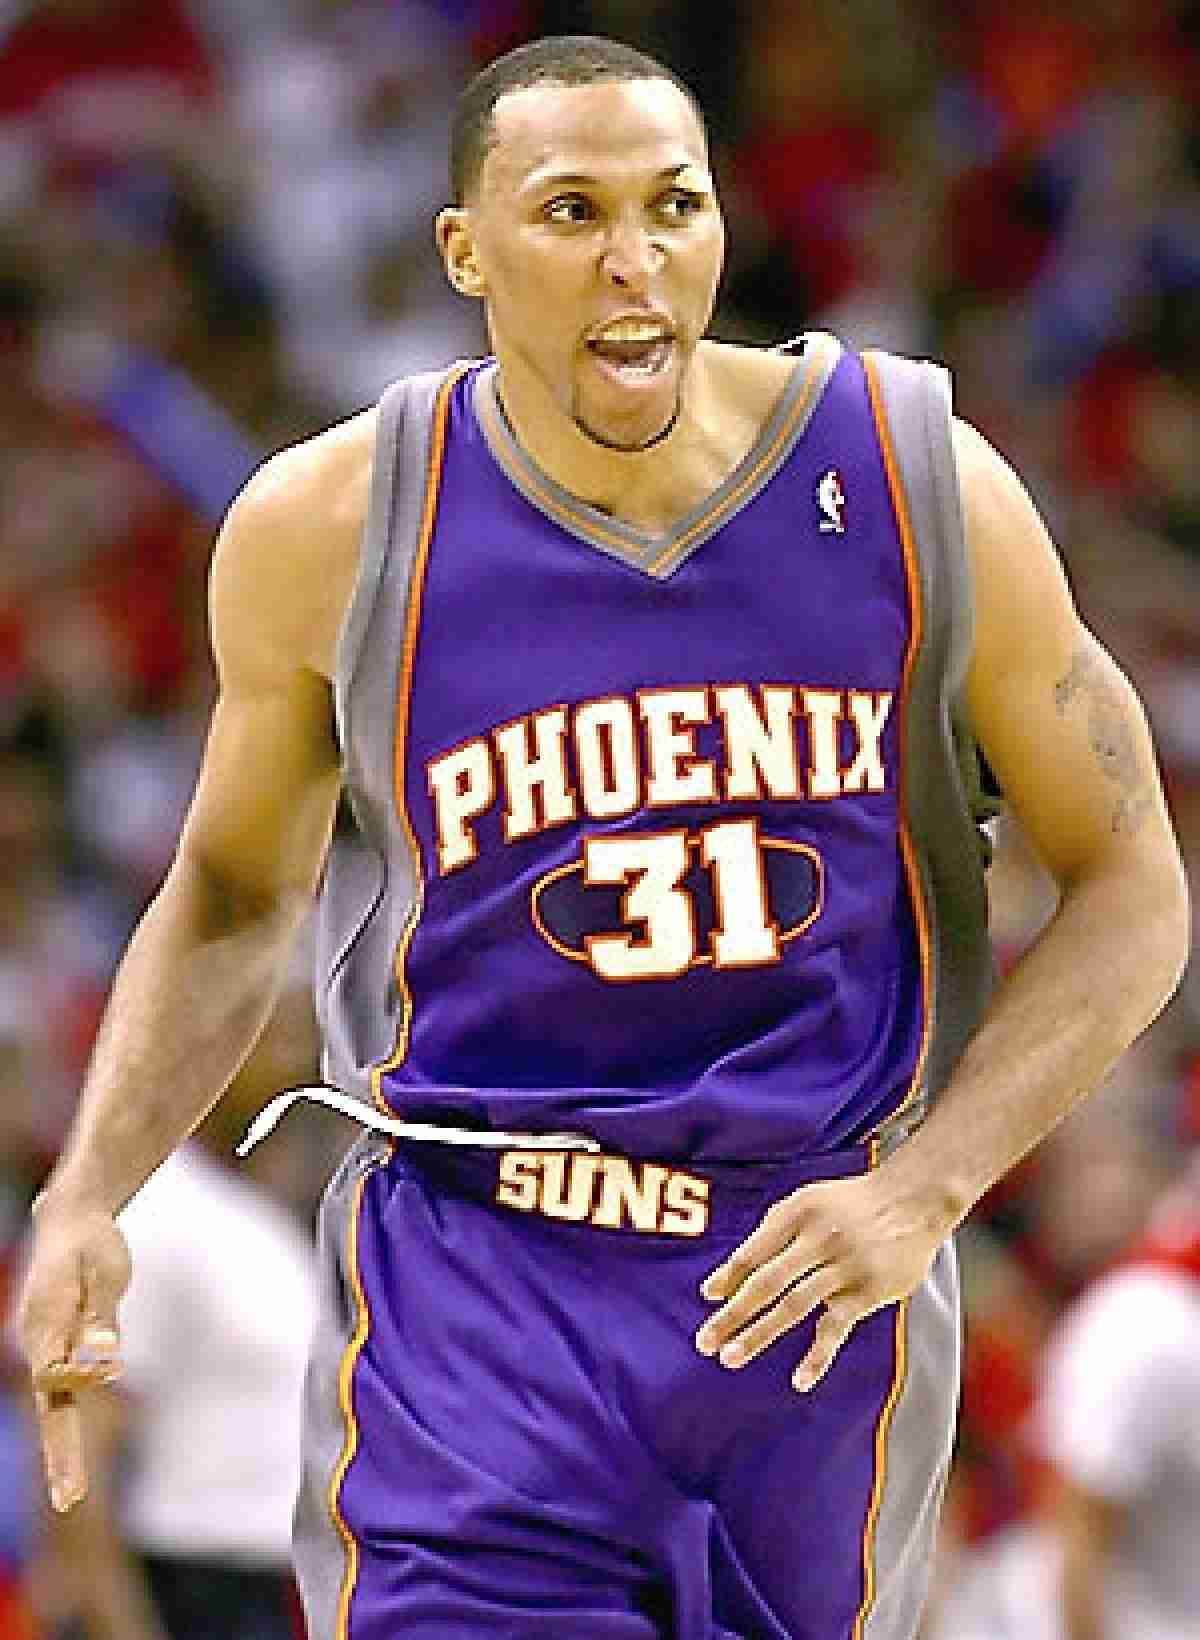 shawn marion all star